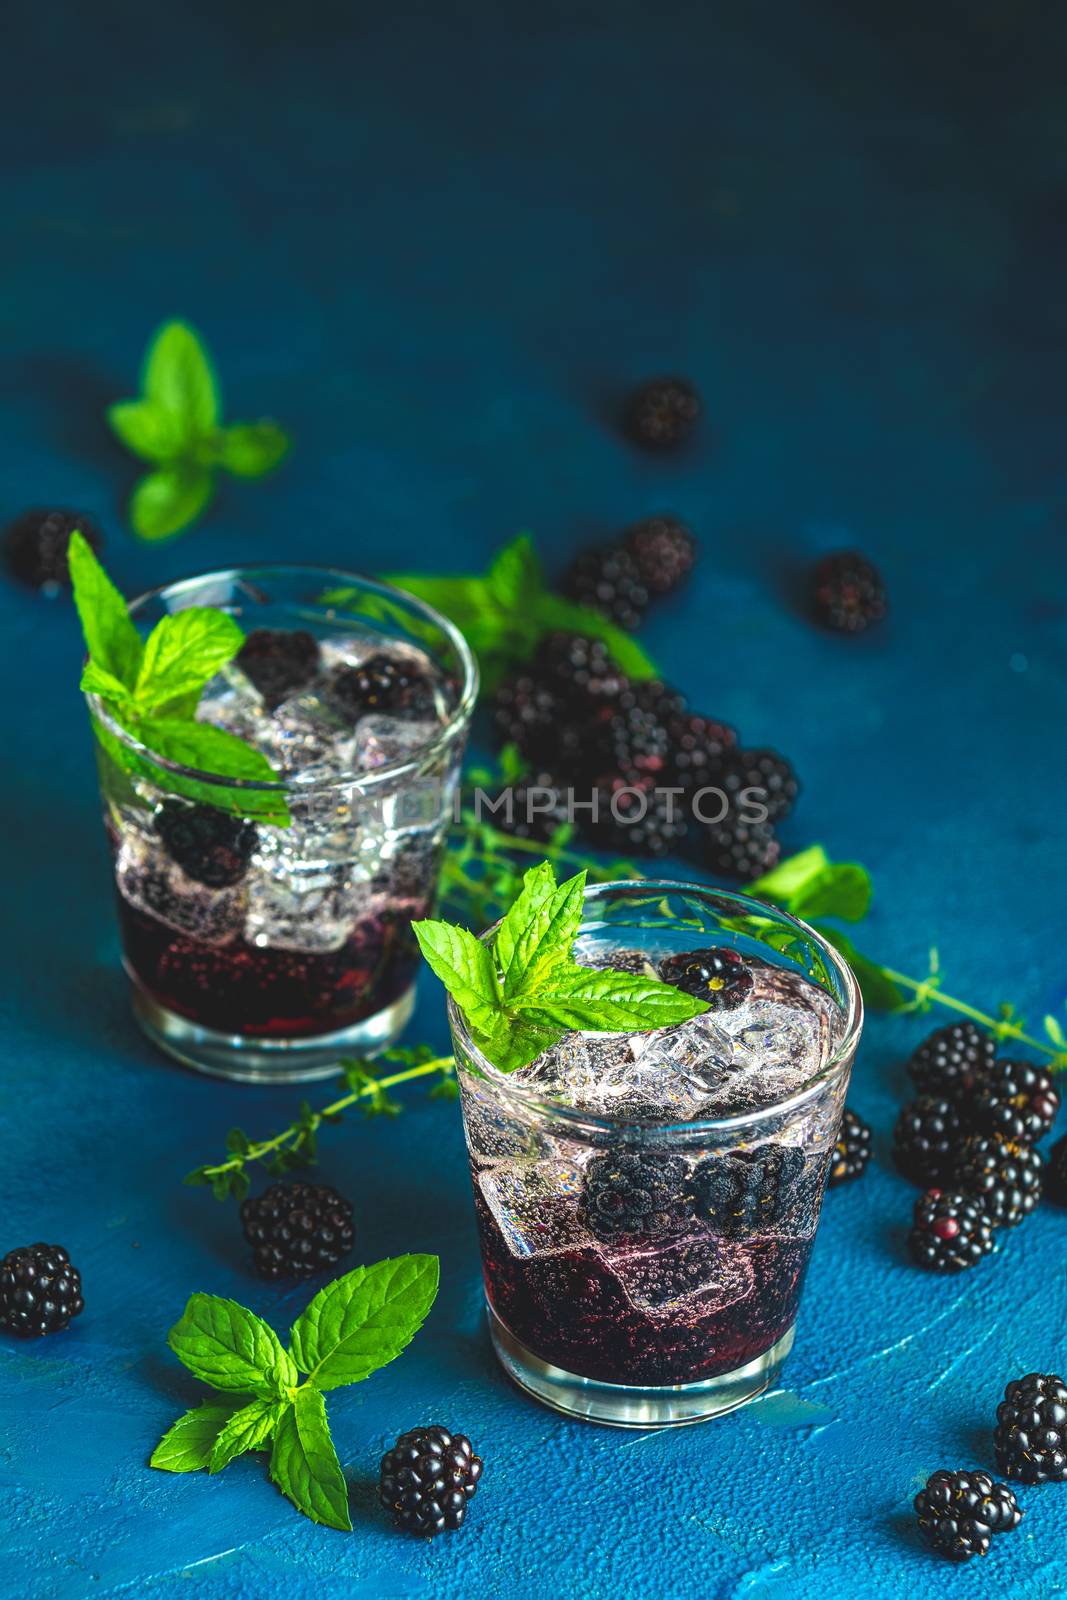 Cold summer berry drink with blackberries. Refreshing summer dri by ArtSvitlyna